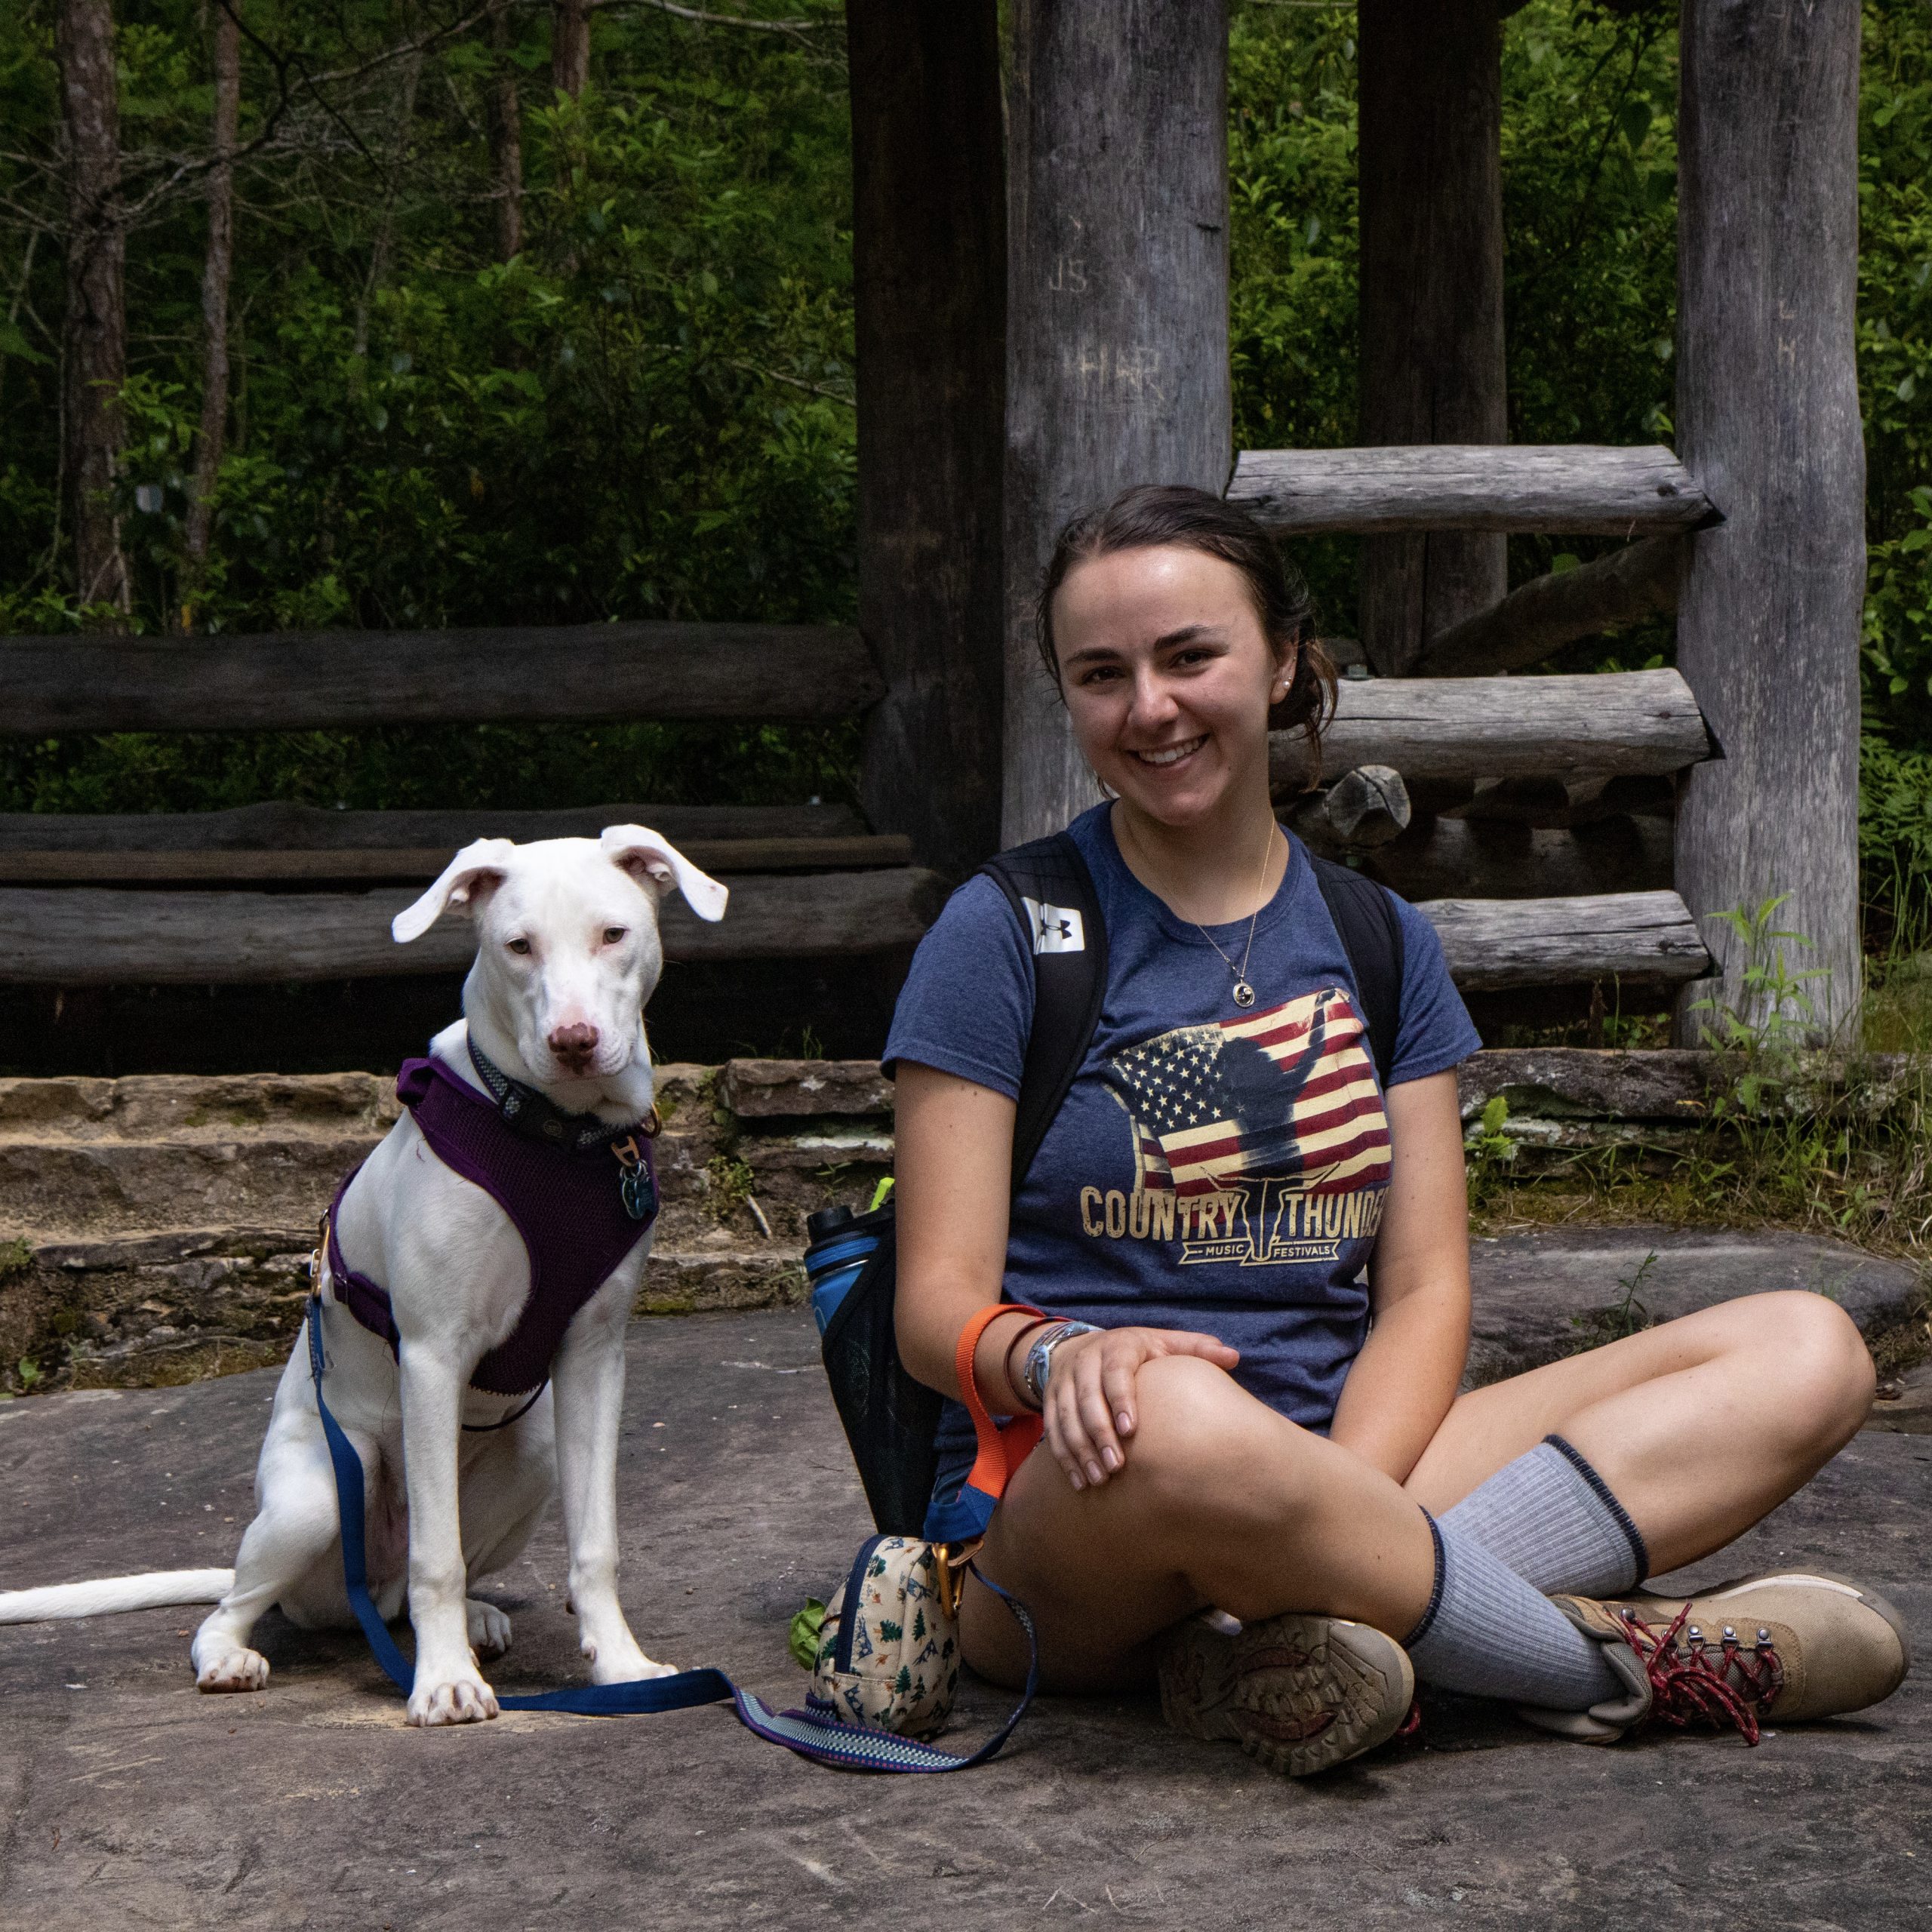 My dog Dexter, and I, at the end of a successful hike in Tennessee. PC: Brett Gangloff